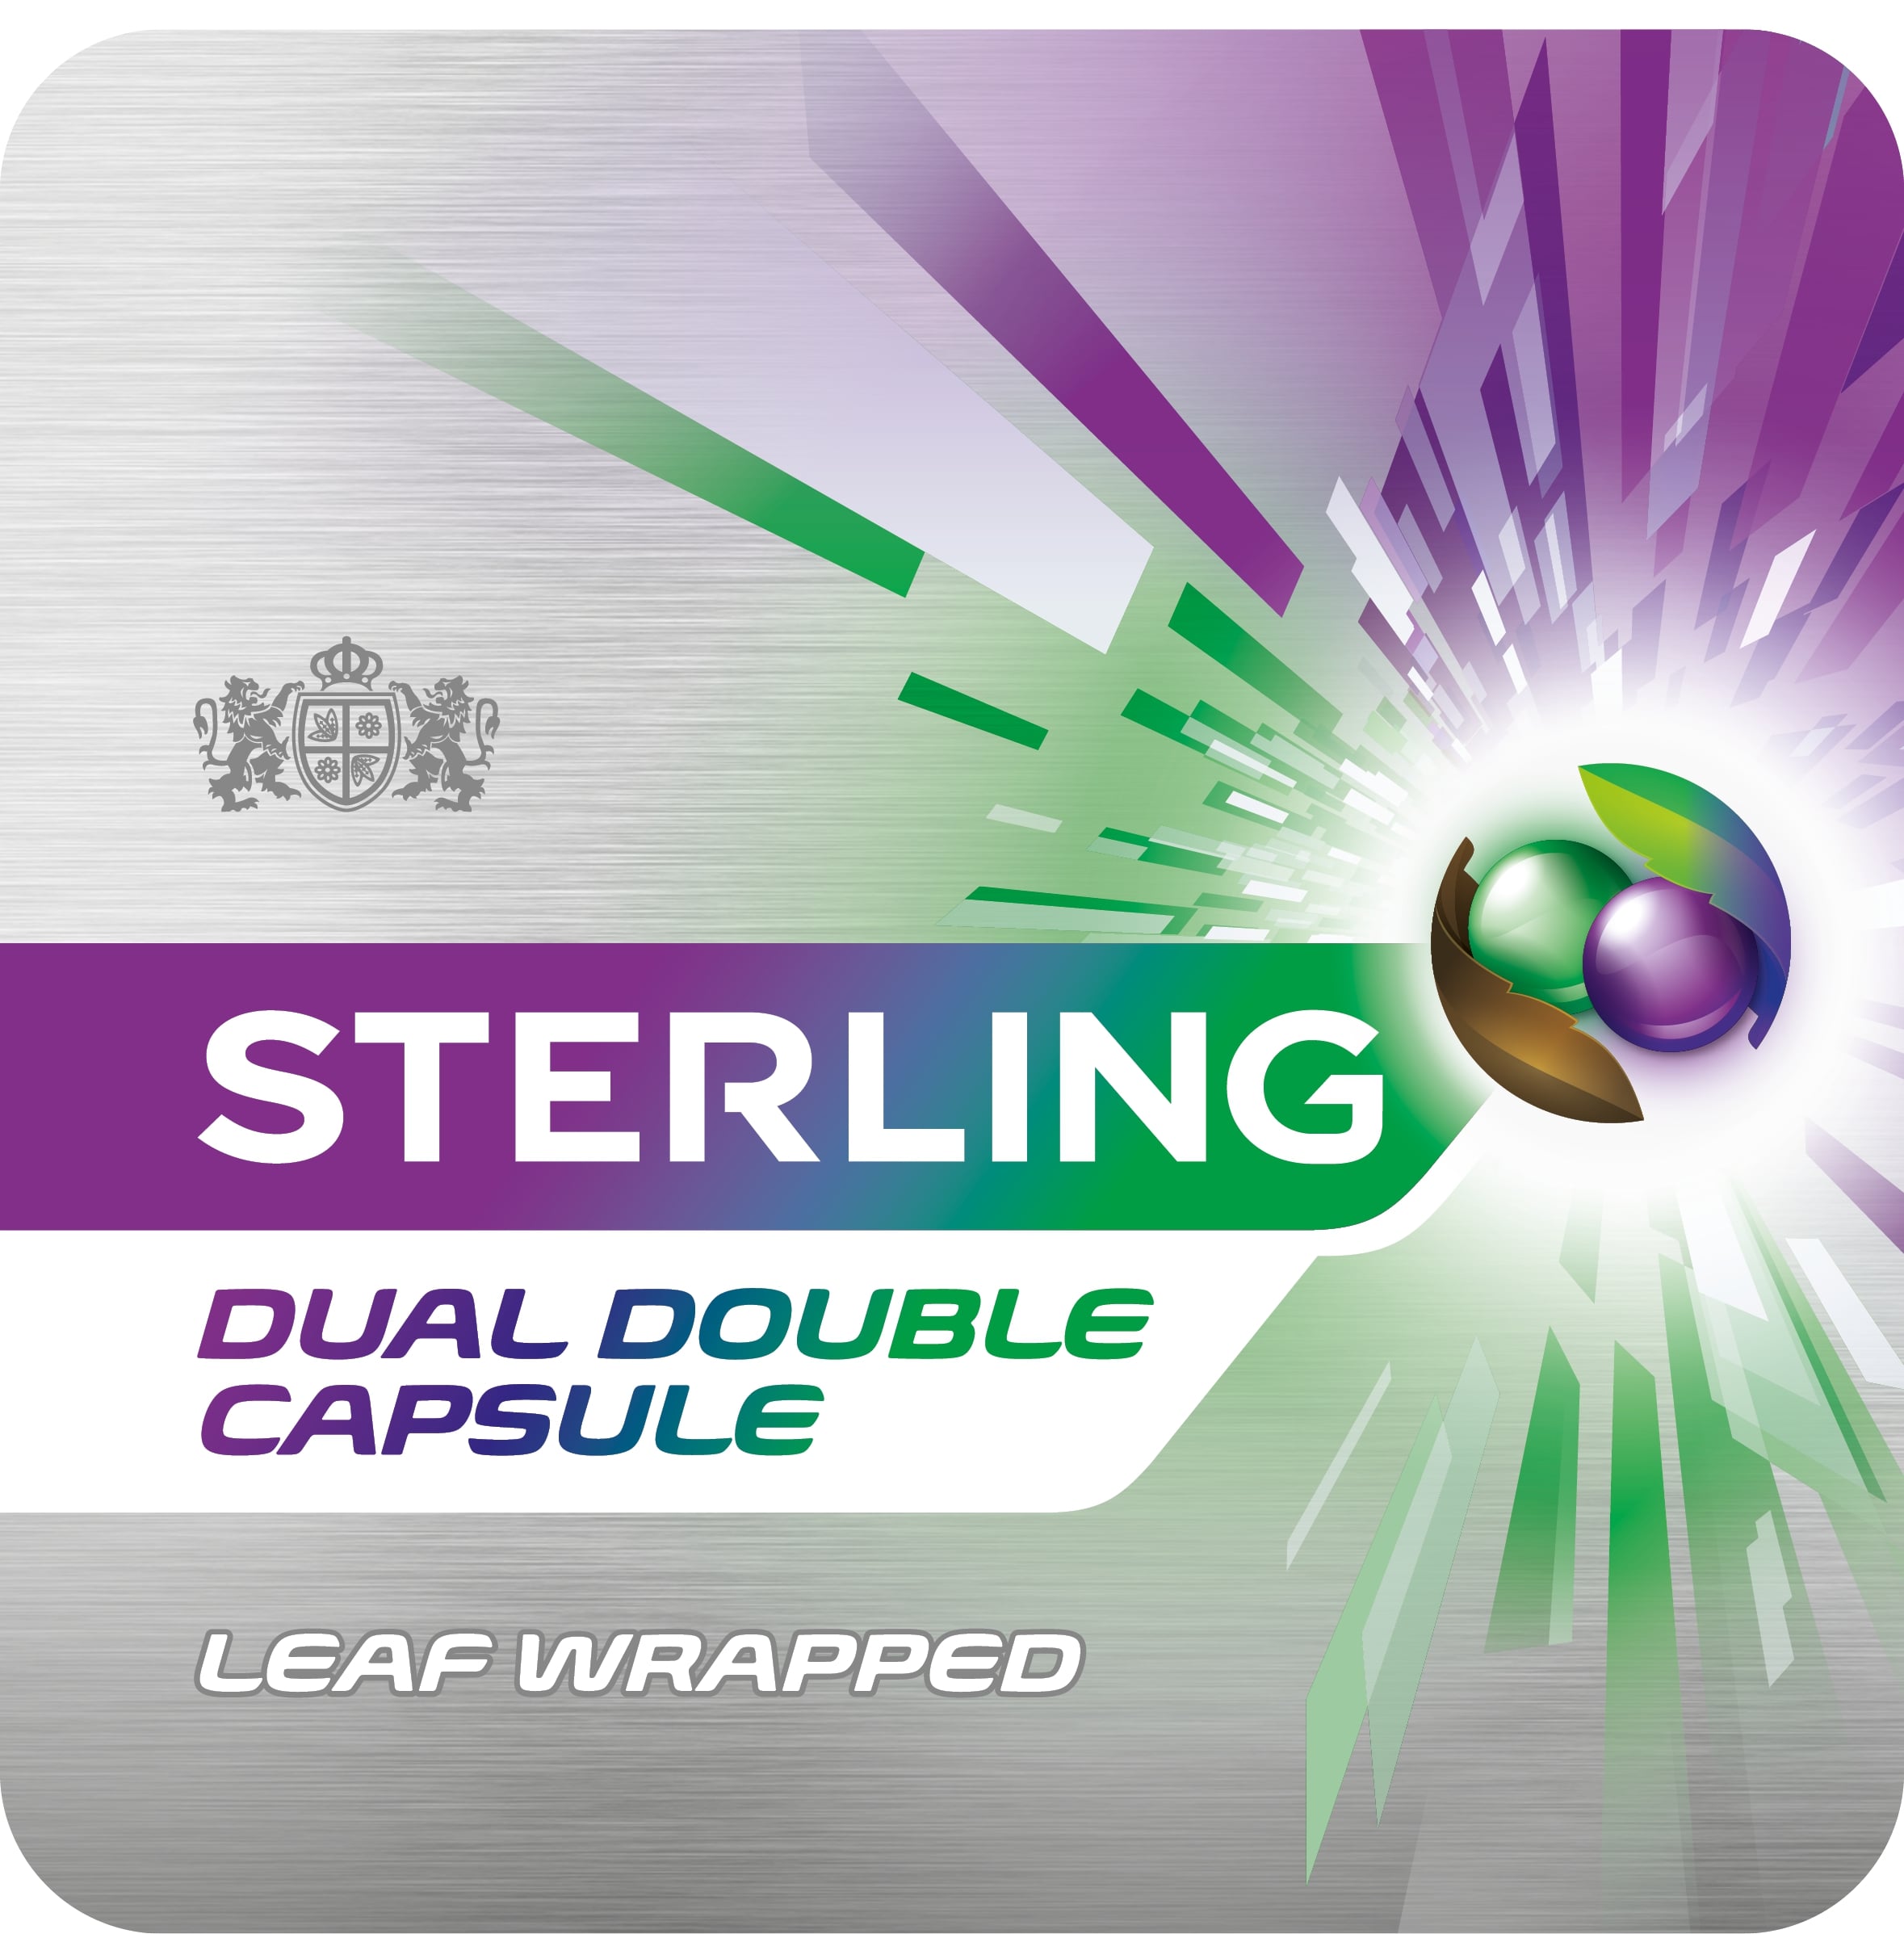 JTI expands cigarillo range with new Sterling Dual Double Capsule Leaf Wrapped